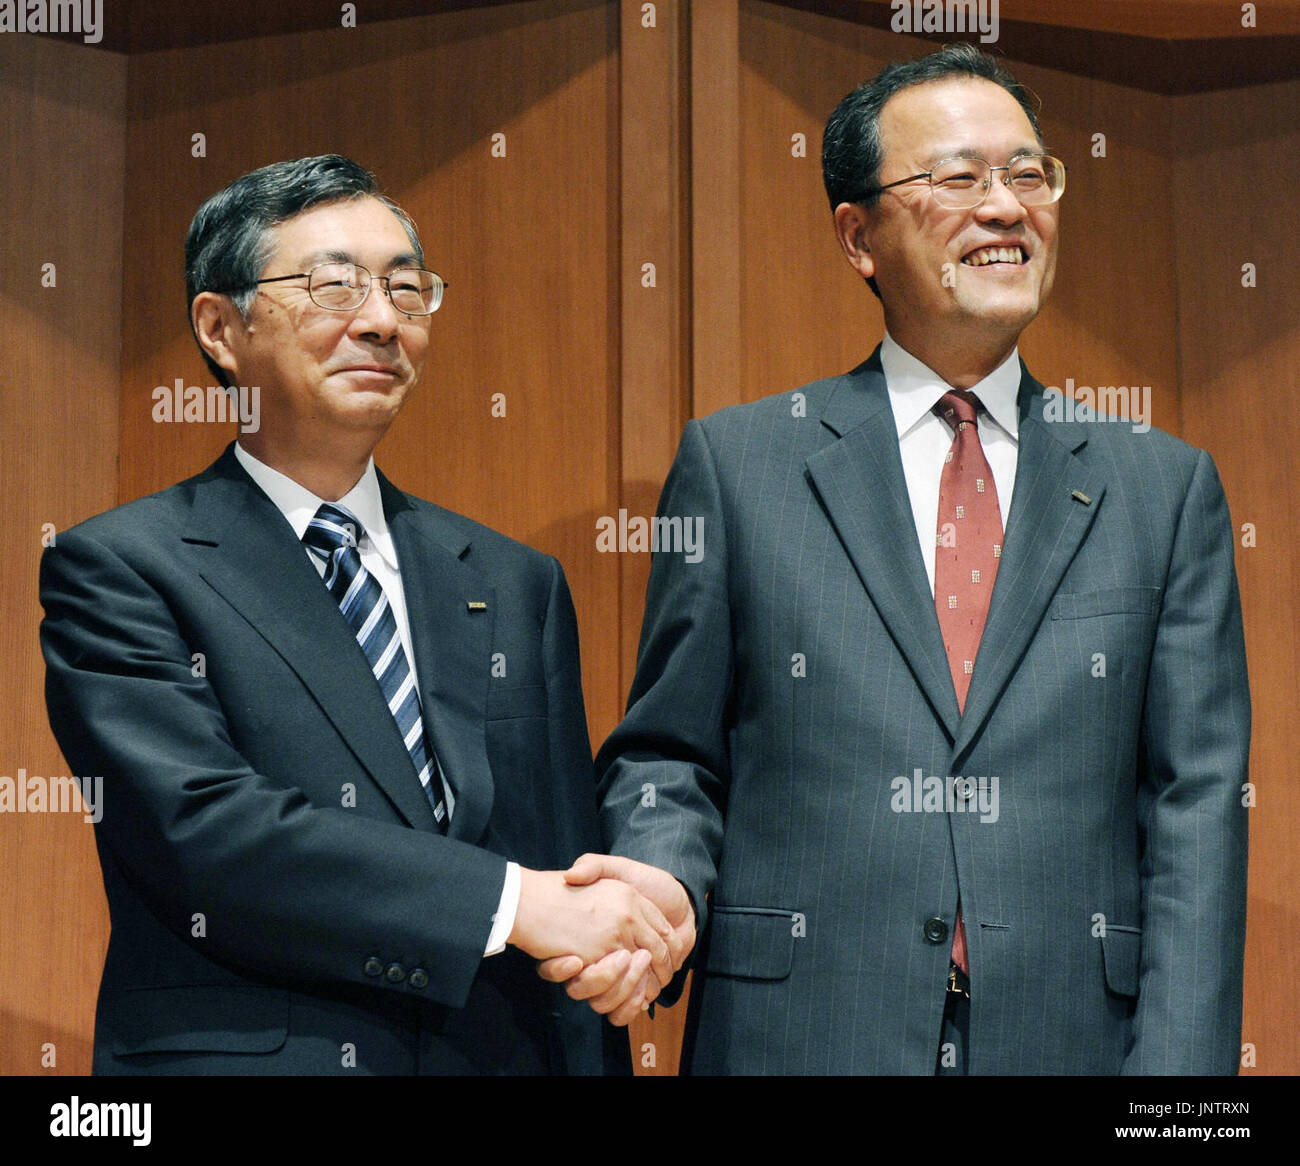 TOKYO, Japan - KDDI Corp. President and Chairman Tadashi Onodera (L) and Senior Vice President Takashi Tanaka shake hands during a news conference in Tokyo on Sept. 10, 2010, after the telecommunications firm announced Tanaka's promotion to president, replacing Onodera on Dec. 1. (Kyodo) Stock Photo